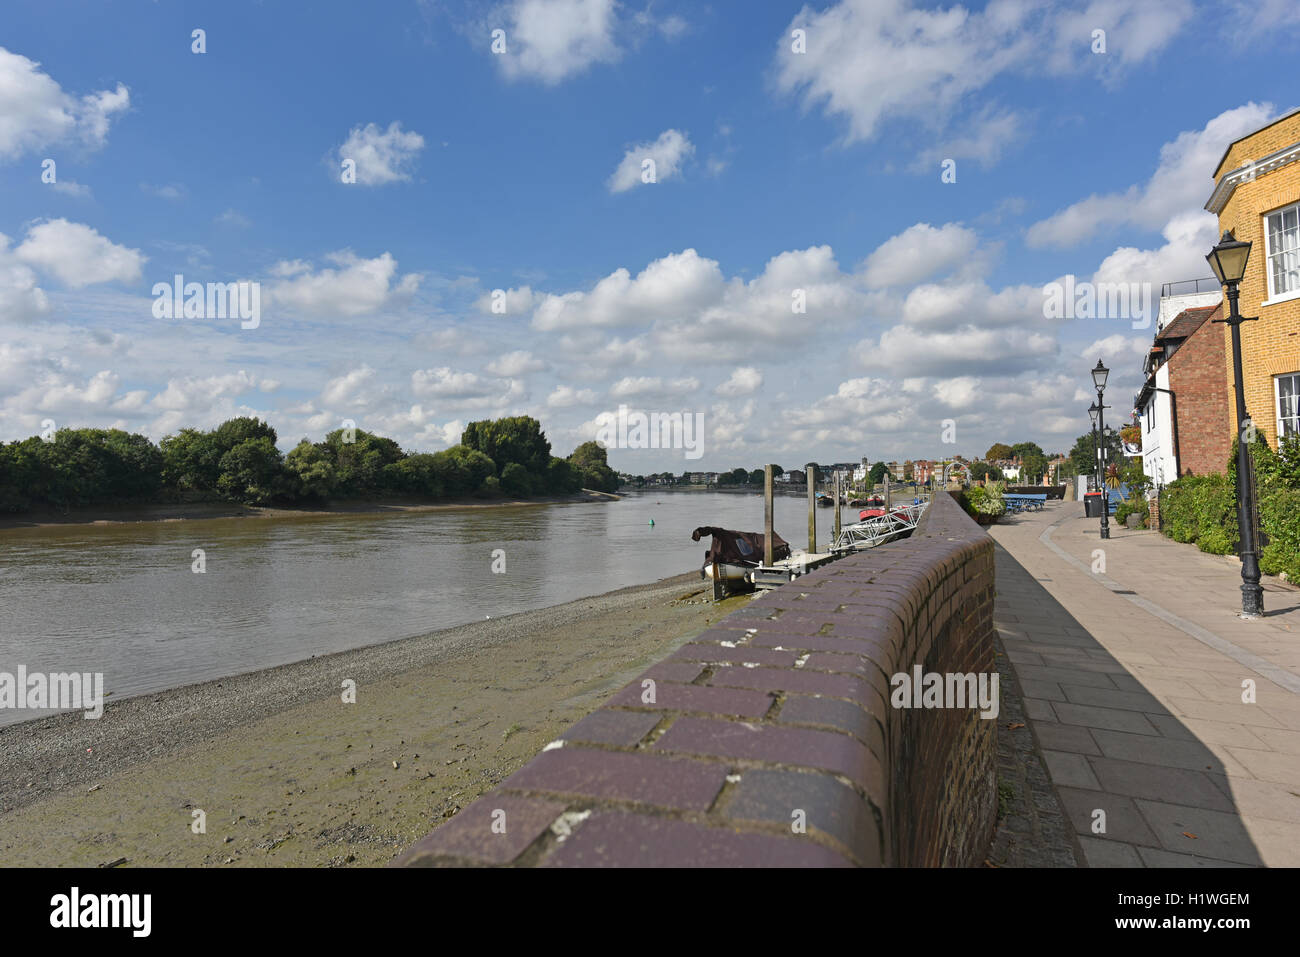 Thames path and Thames river in London near Hammersmith bridge. Stock Photo